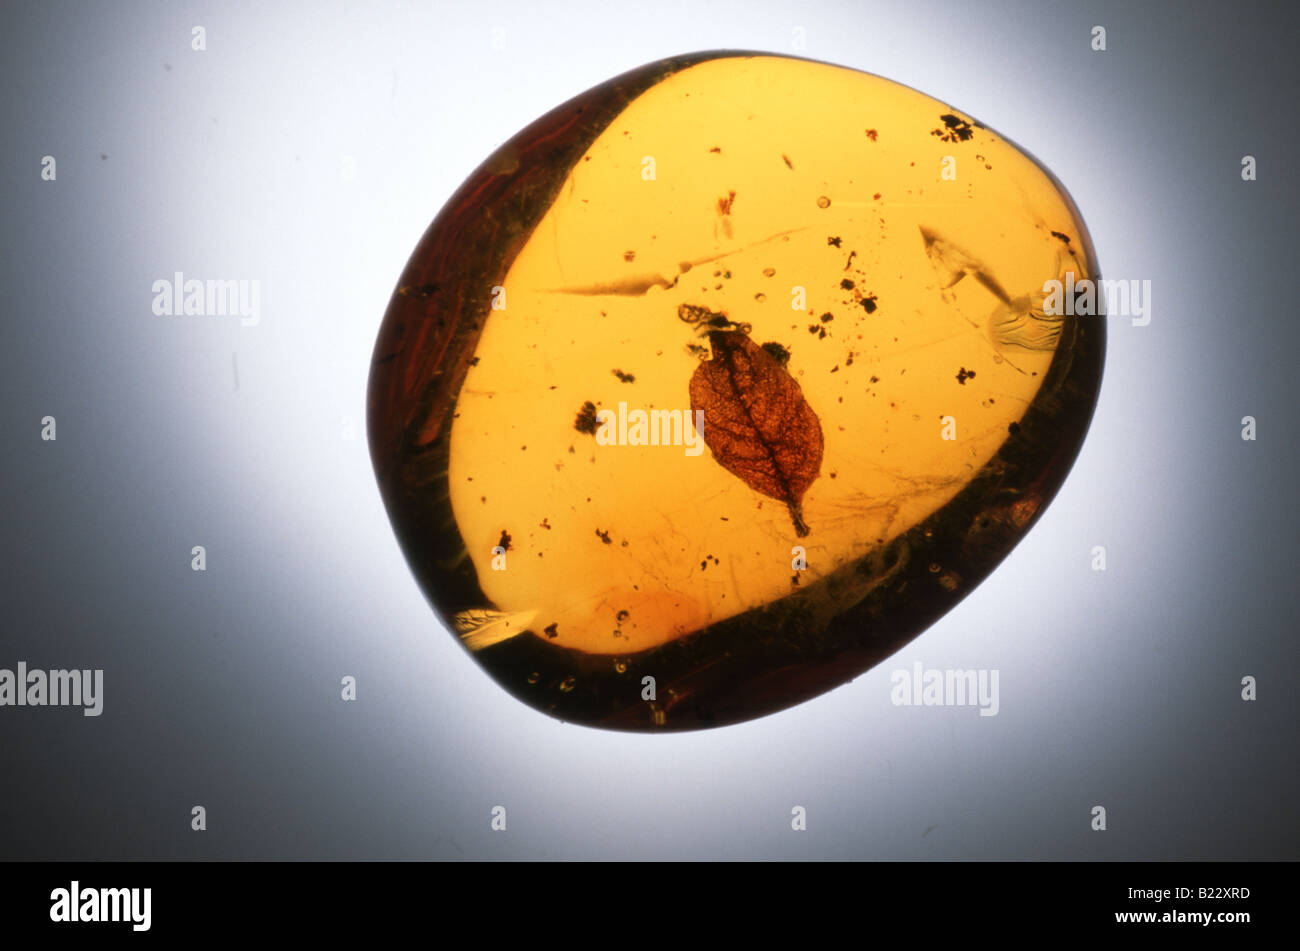 Leaf preserved in Amber Stock Photo - Alamy